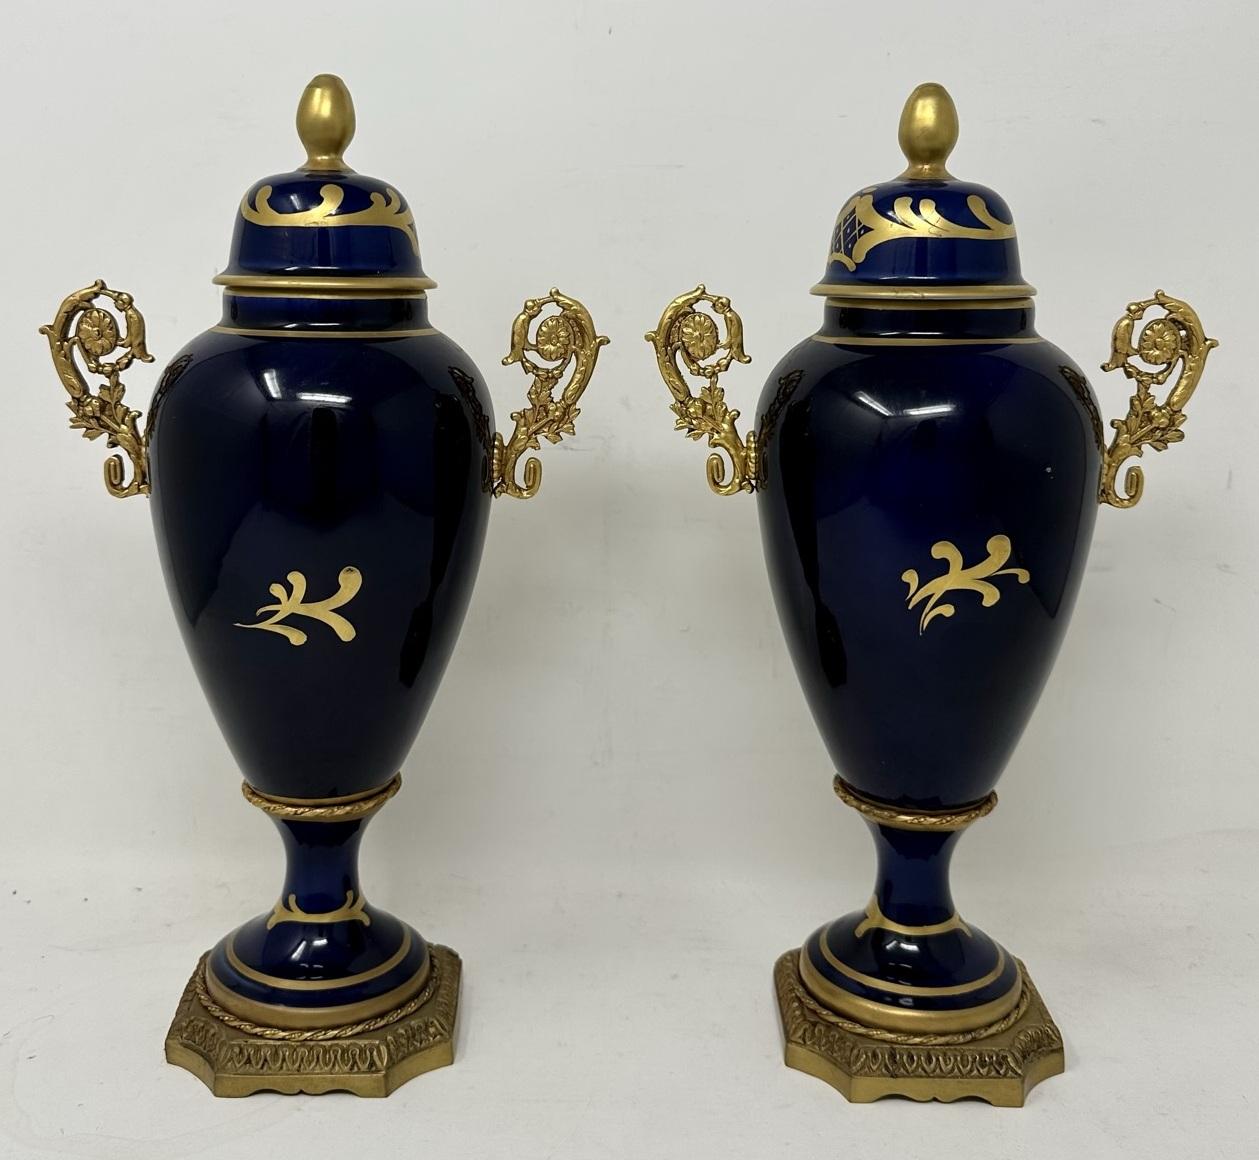 19th Century Antique Pair of French Limoges Porcelain Ormolu Mounted Urns Vases Centerpieces